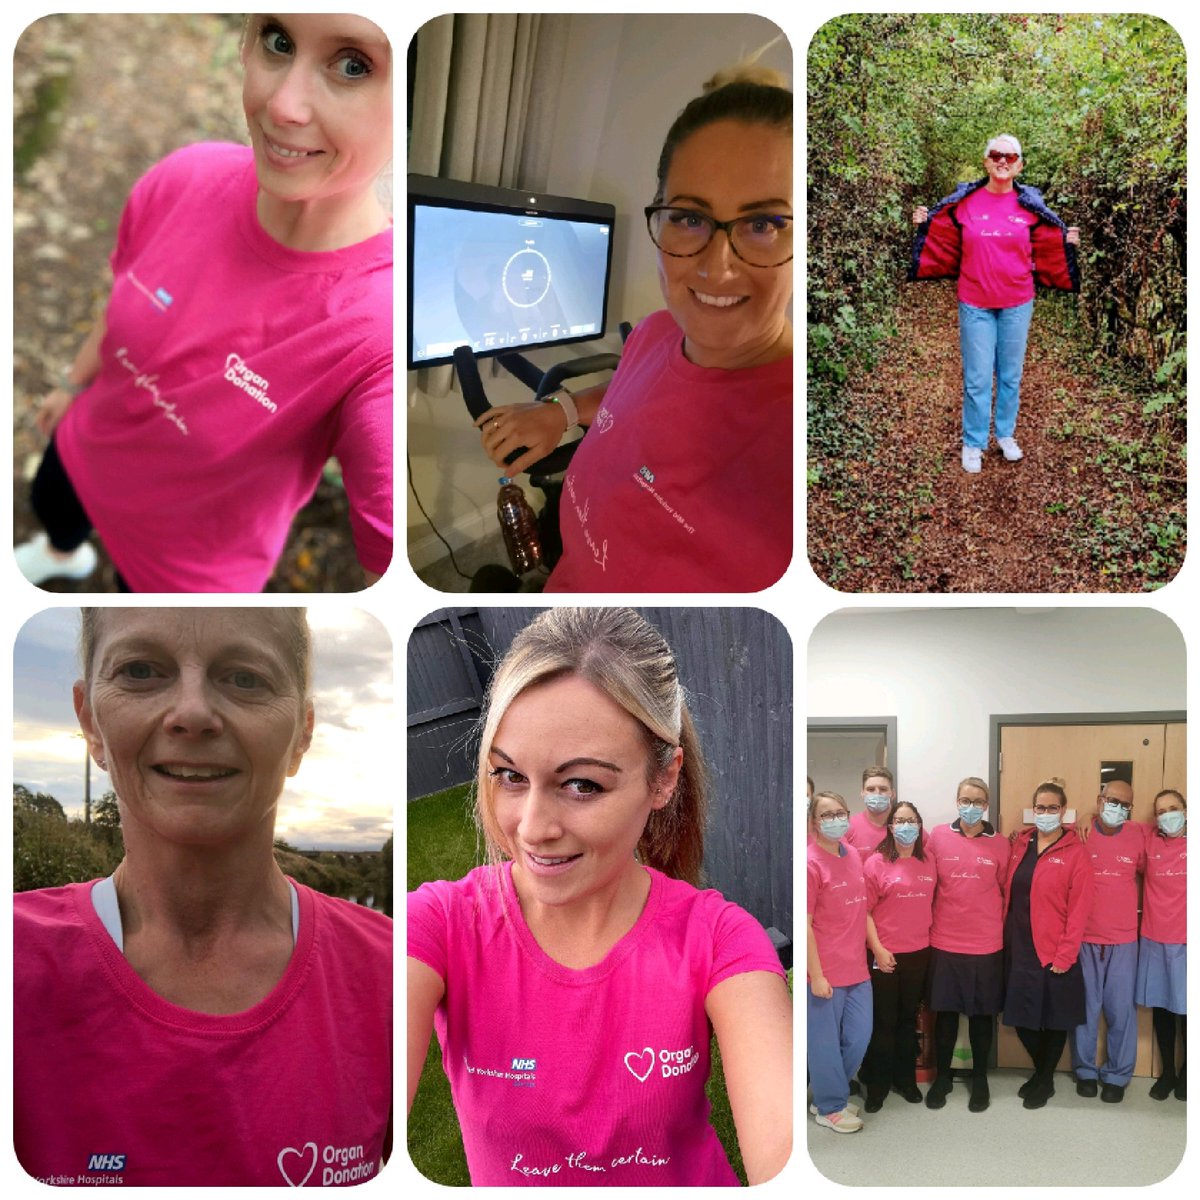 Some of #teamicu who have embraced the challenge & taken part in @Race4Recipients #critcare #OrganDonationWeek #race4recipients